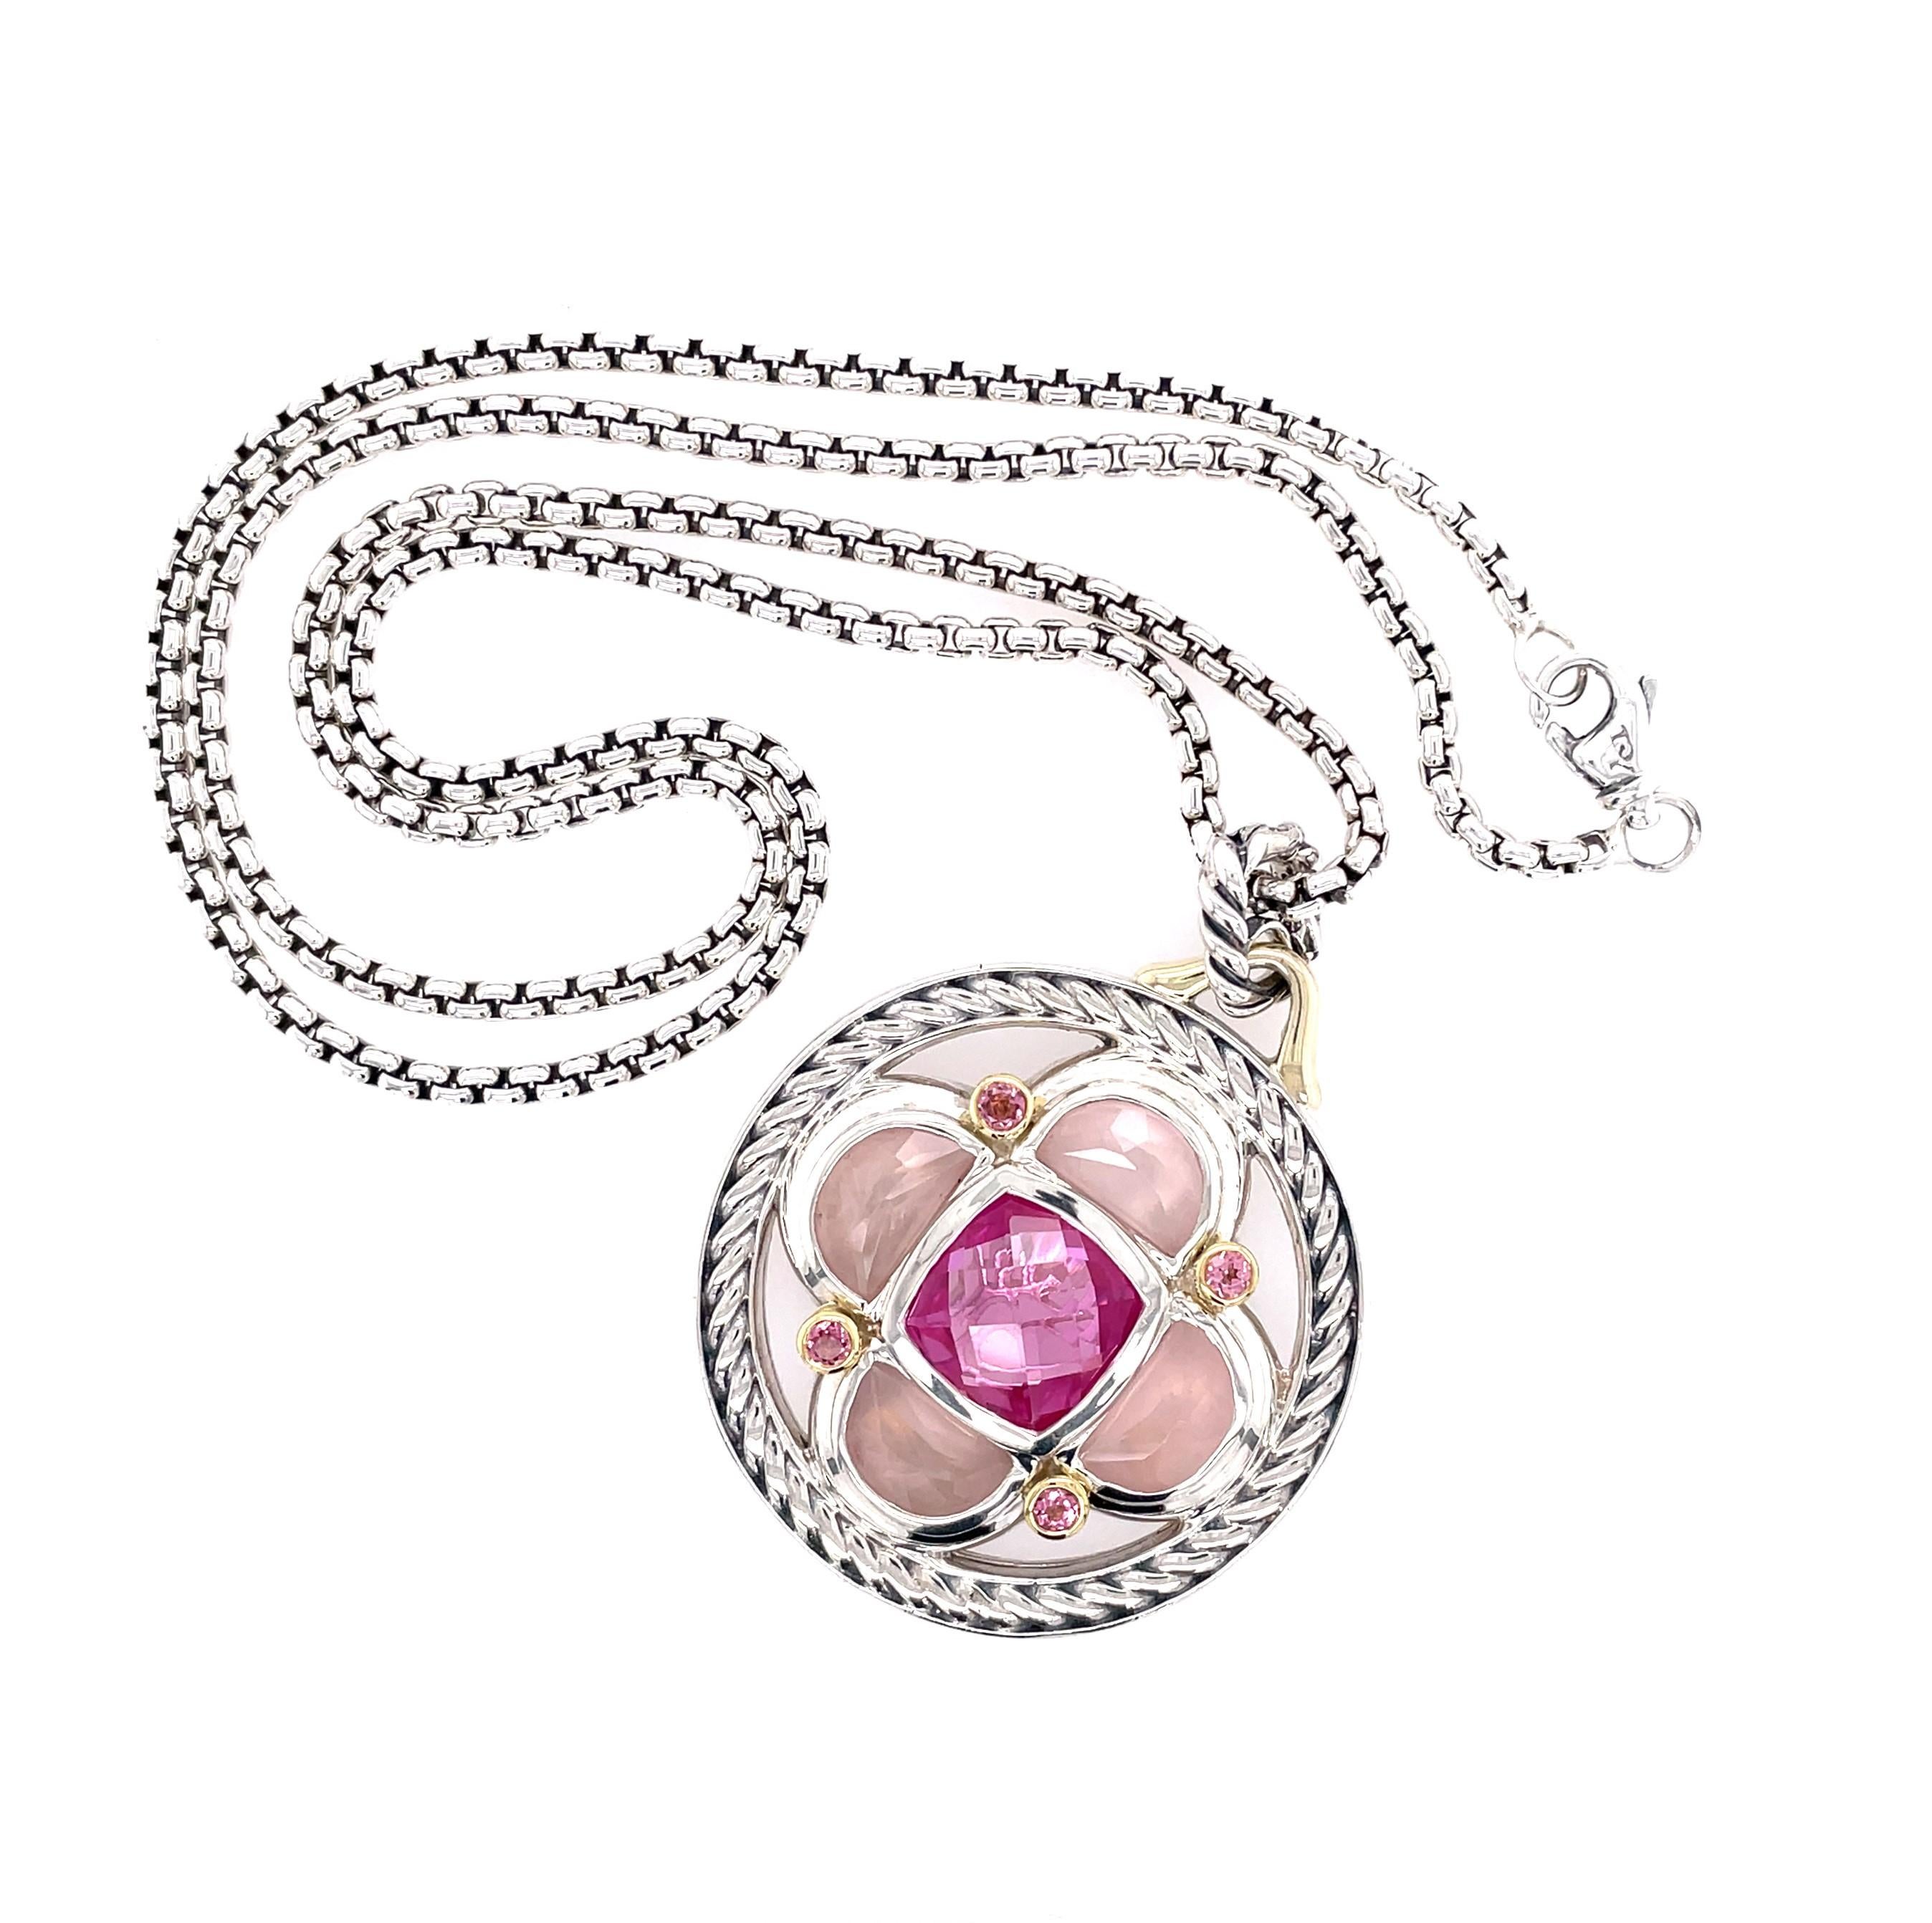 From the Renaissance Collection by well known designer David Yurman, this iconic necklace includes the Half Moon Pendant Enhancer in sterling silver and 18 karat yellow gold with vivid pink tourmaline and soft pink quartz. Included in this cheerful